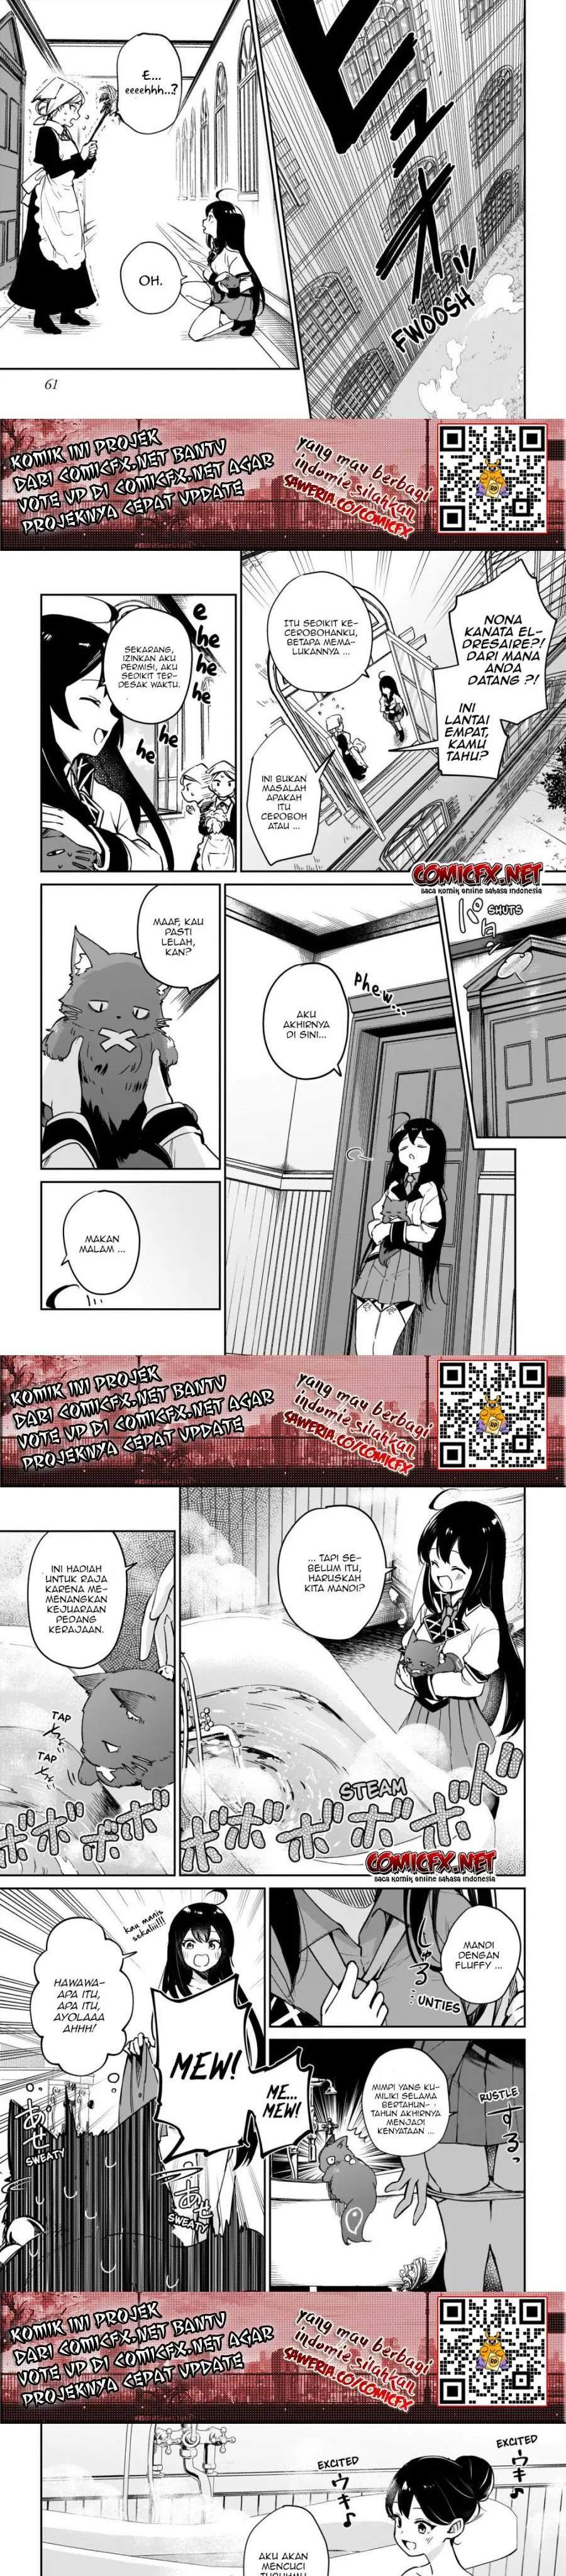 Saint? No, Just a Passing Monster Tamer! ~The Completely Unparalleled Saint Travels with Fluffies~ Chapter 02.1